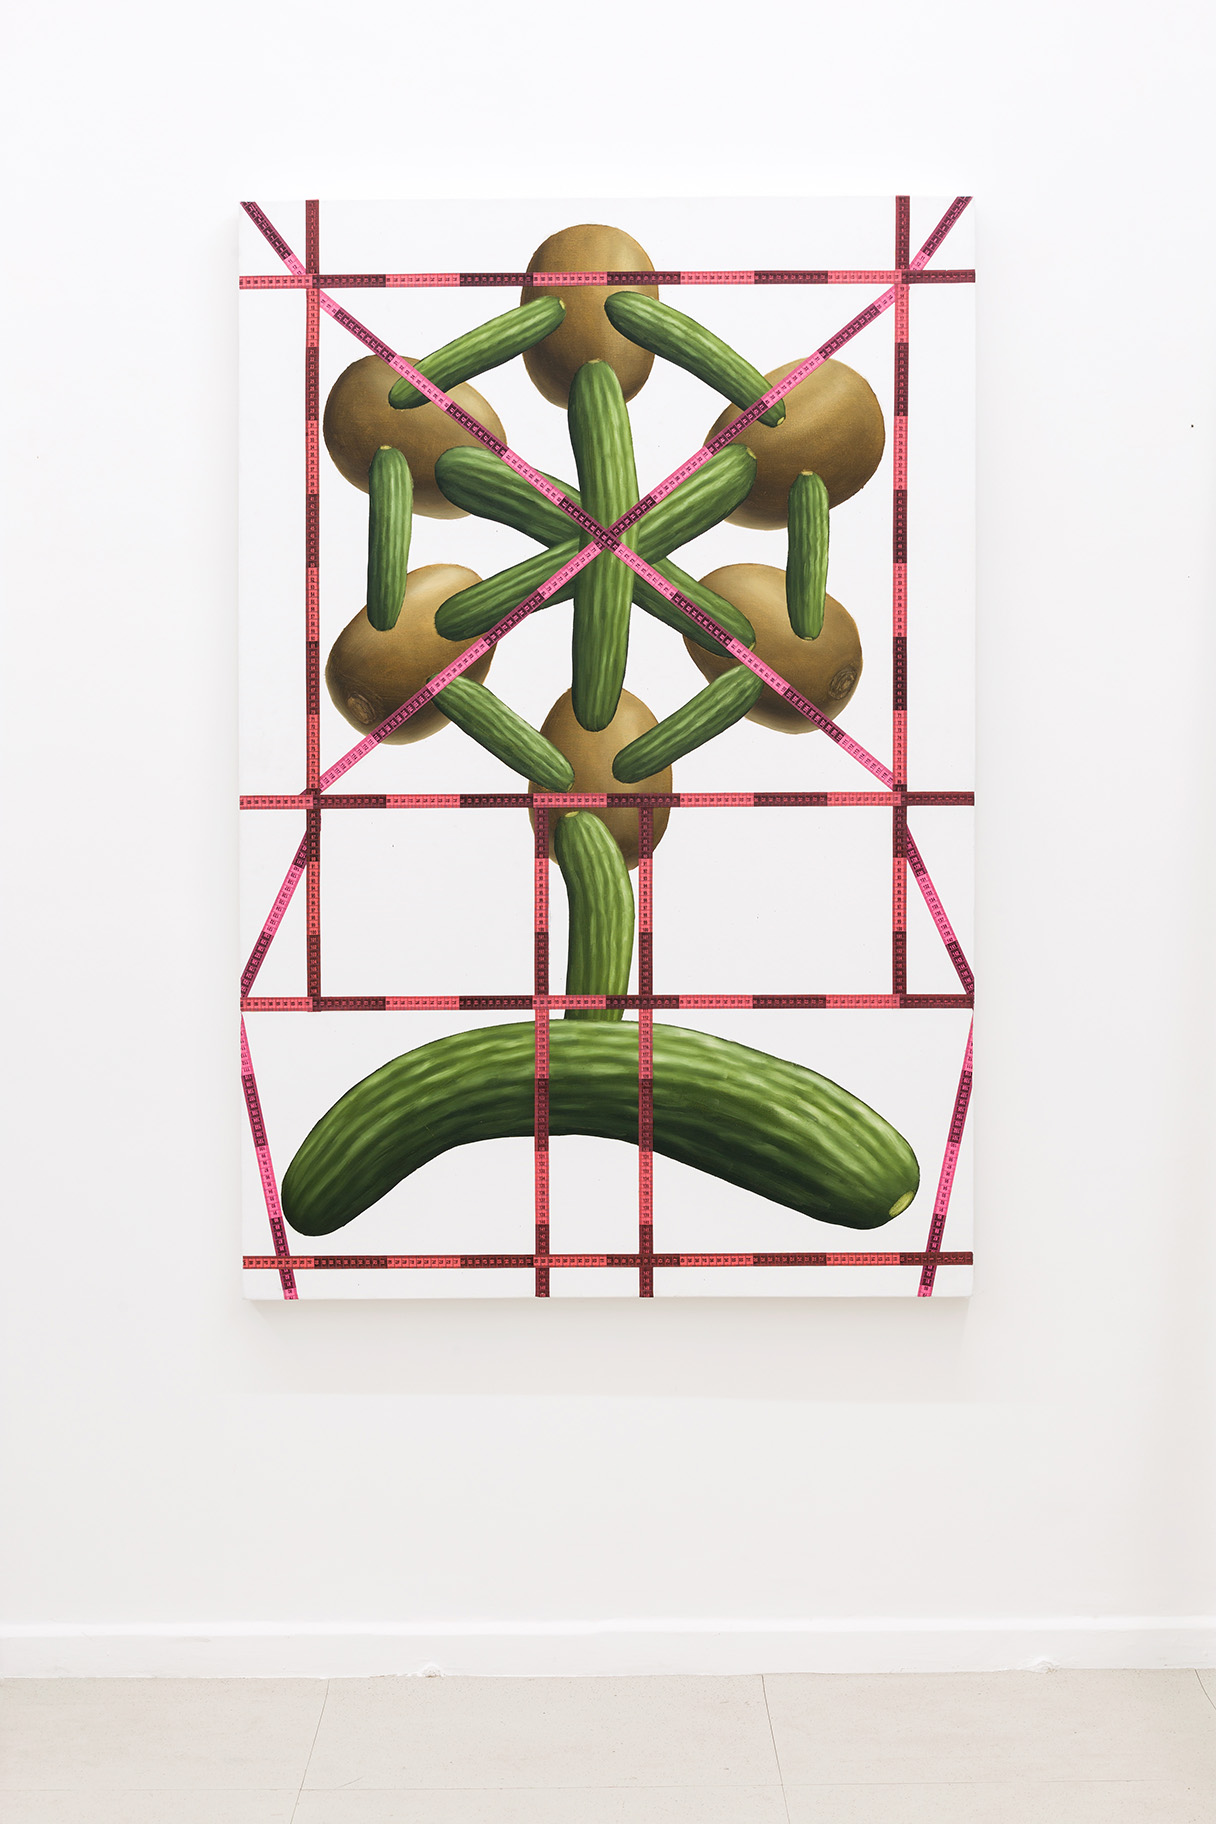 Flower Composition with Kiwis and Cucumbers, 2021, Plastic tape measure and oli on canvas, 100 x 150 cm